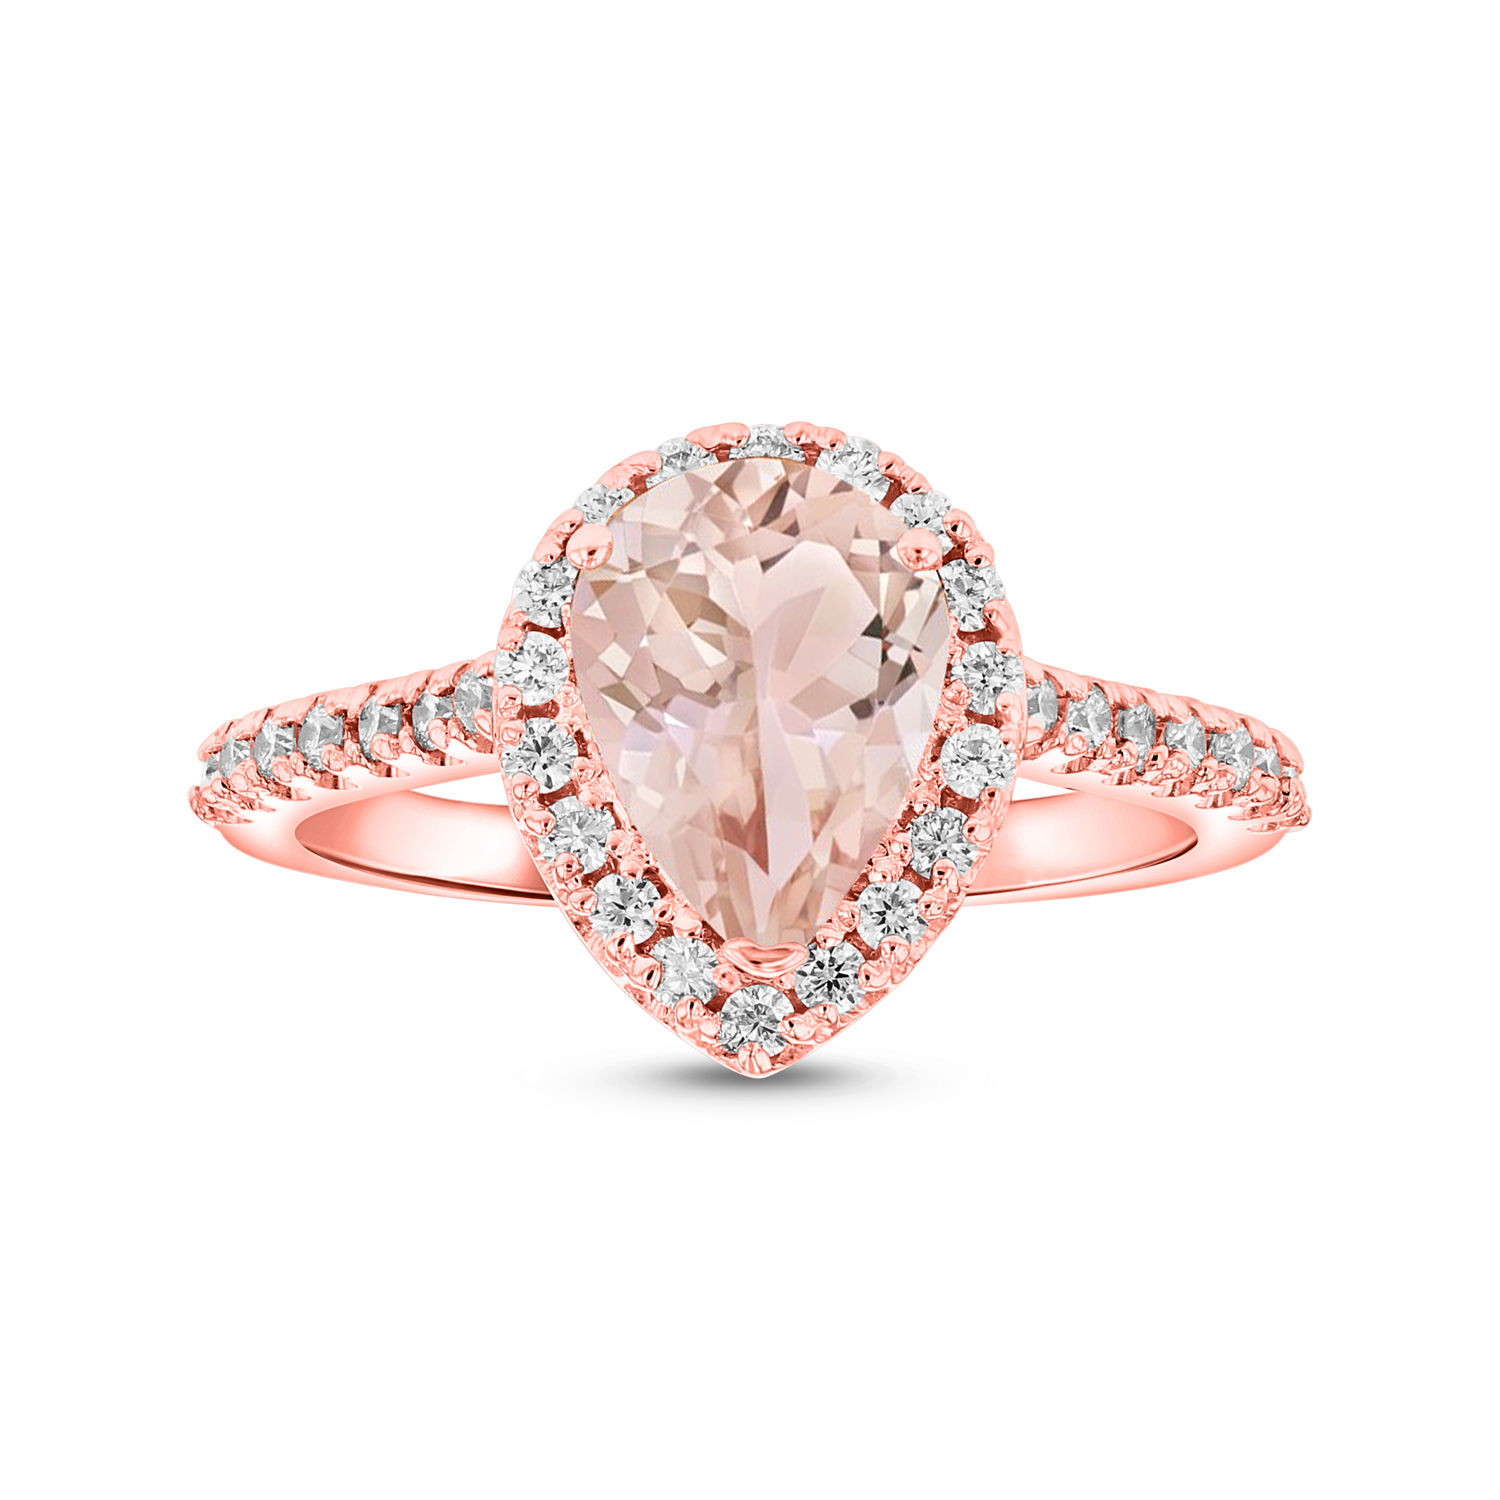 View 1.25 ctw Diamond and 9X7mm Pear Shape Morganite Ring in 14K Rose Gold